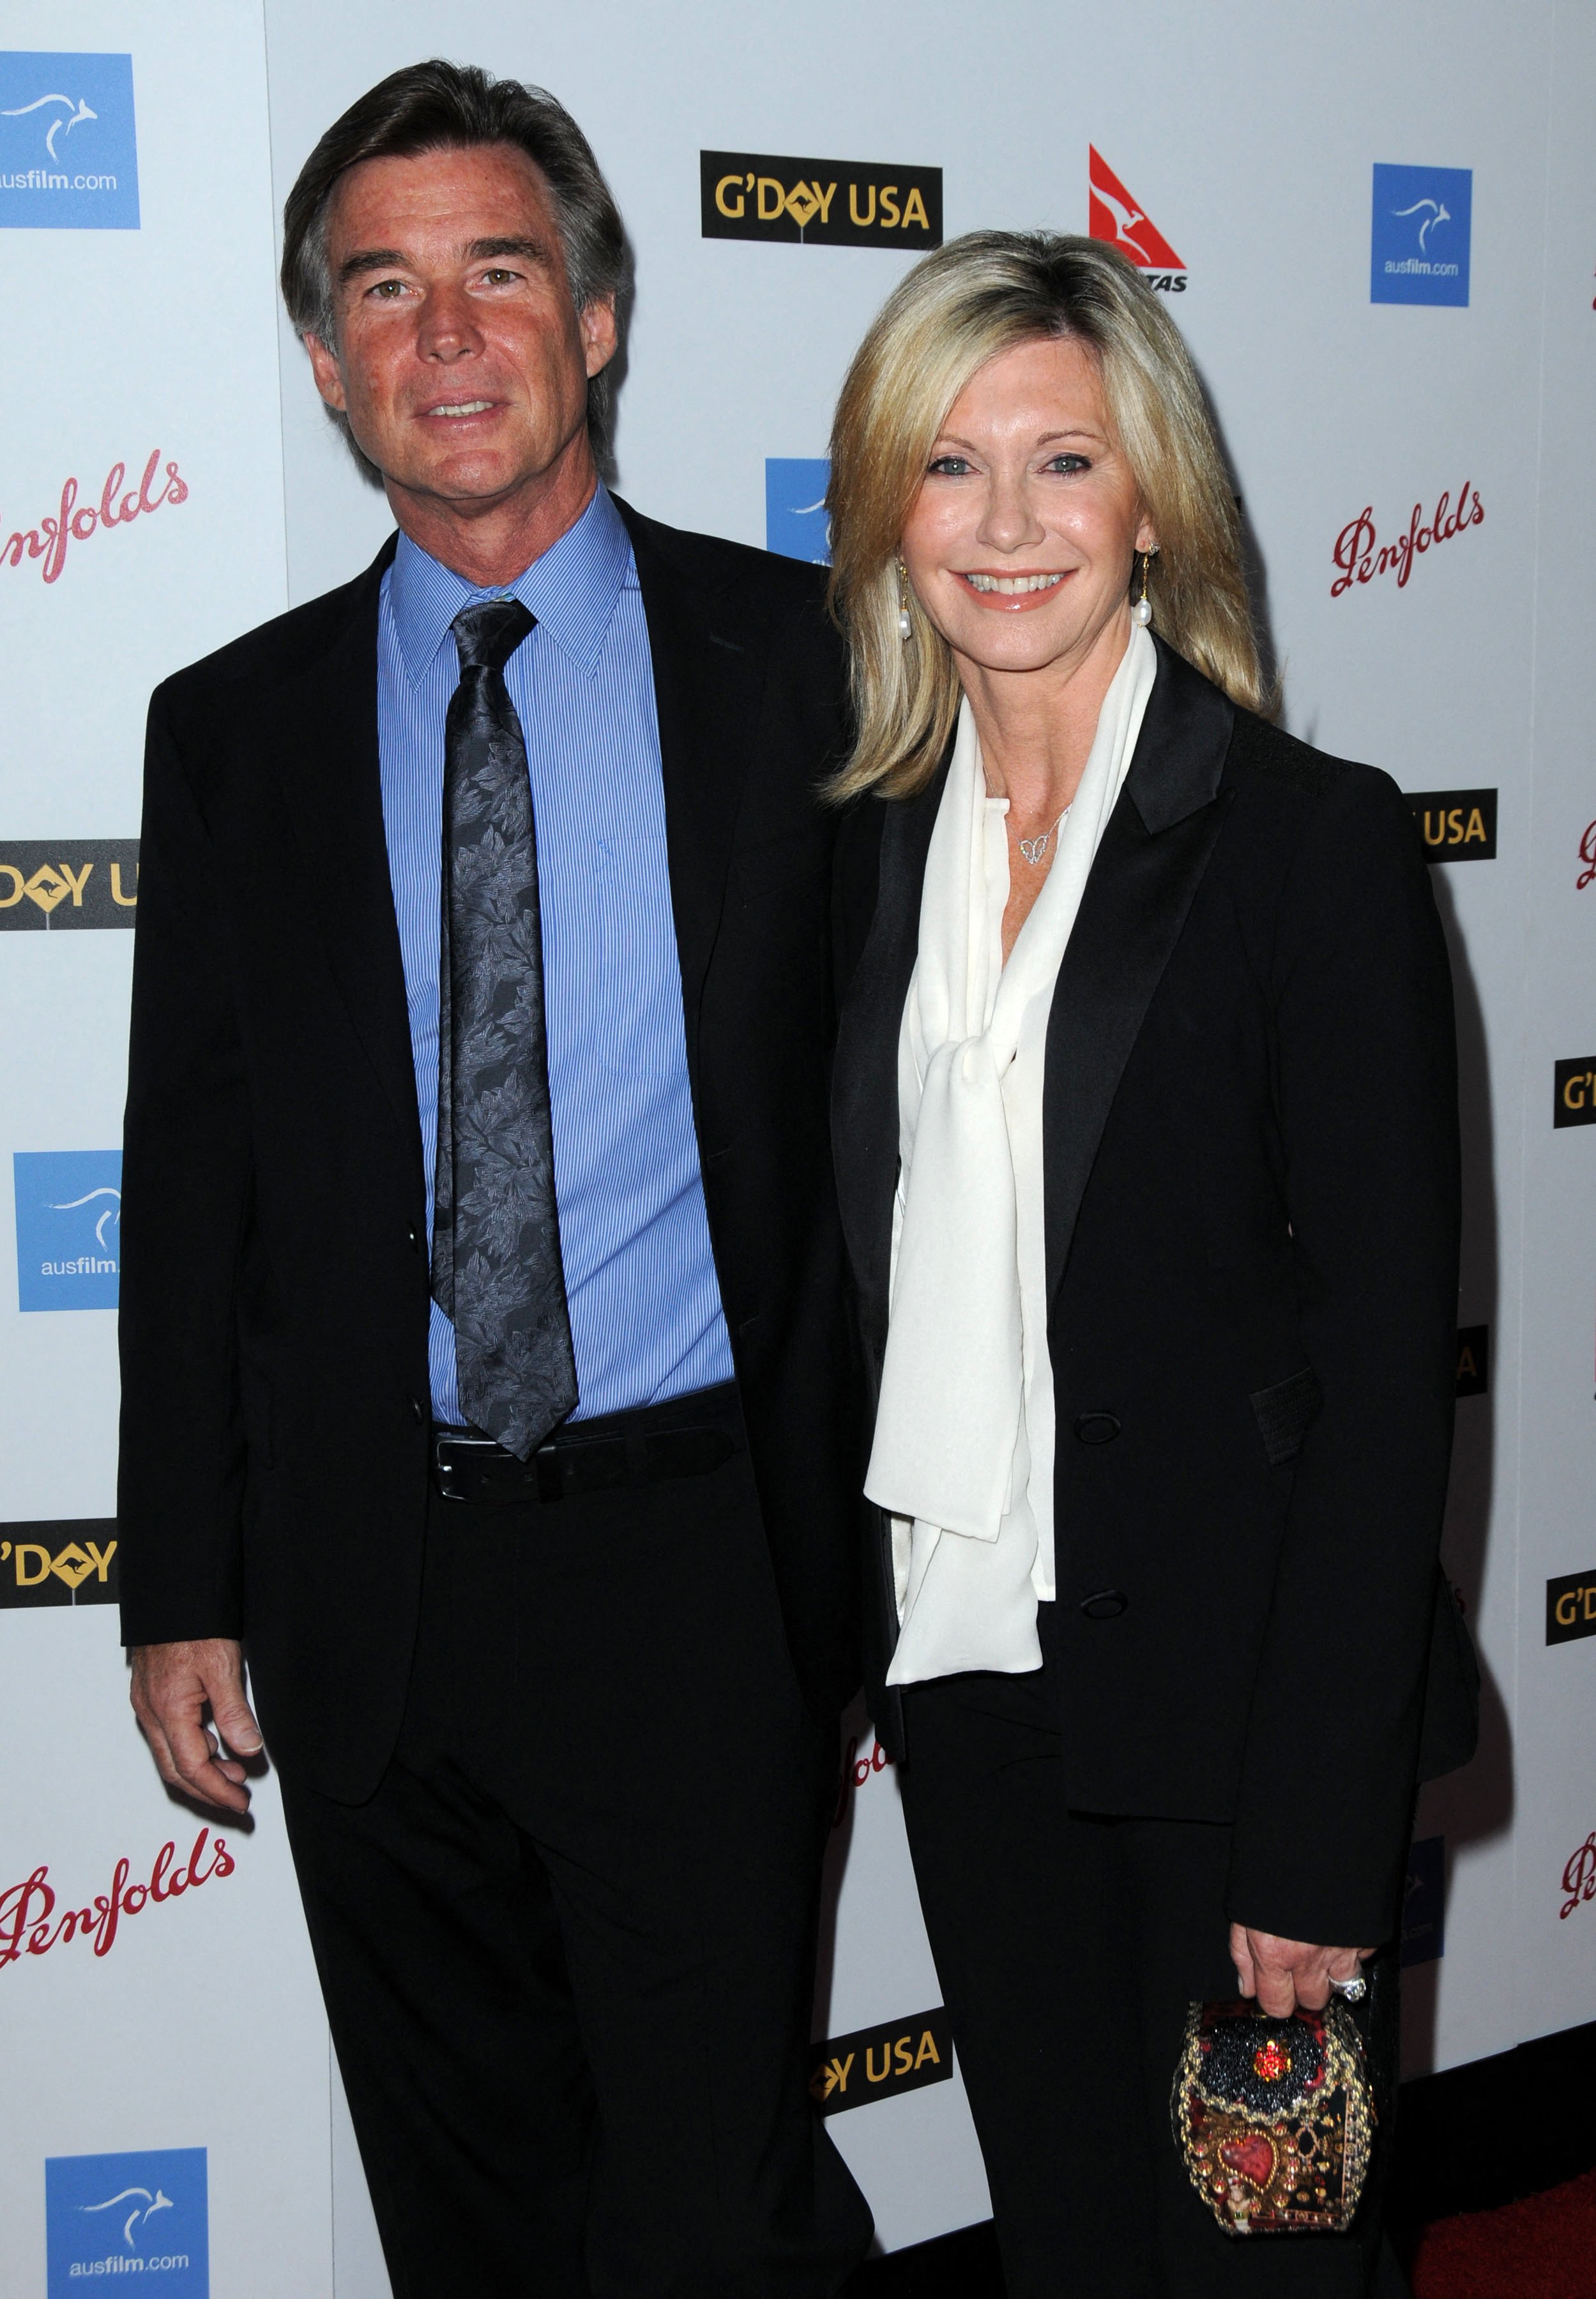 Actress Olivia Newton-John and her husband John Easterling attend the G'Day USA Australia Week 2009 Gala held at the Kodak theatre in Los Angeles, January 18, 2009  | Source: Getty Images